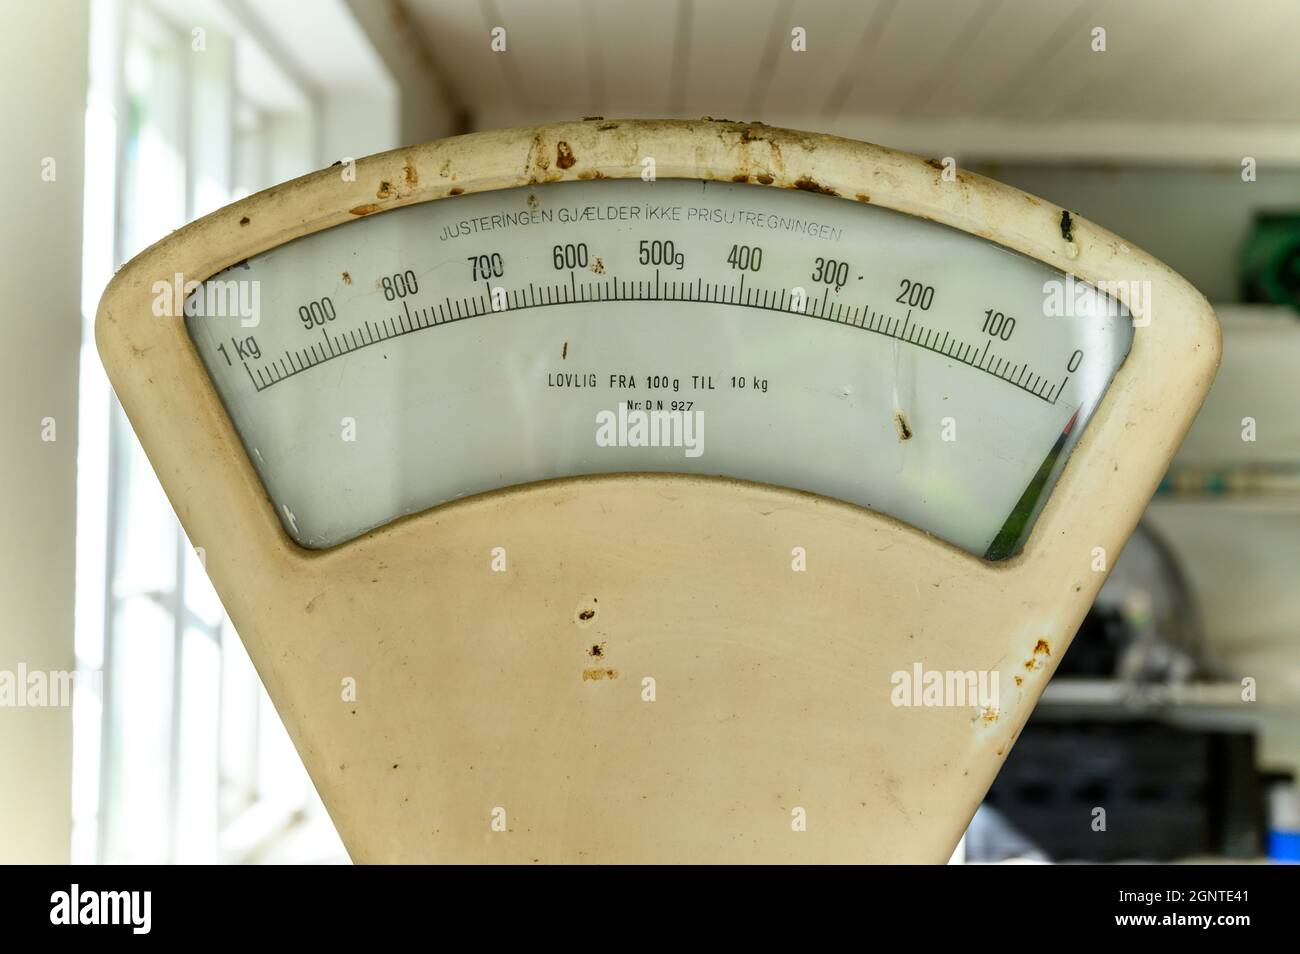 https://c8.alamy.com/comp/2GNTE41/old-norwegian-disused-scales-display-in-a-closed-private-gardening-outlet-in-telemark-norway-2GNTE41.jpg